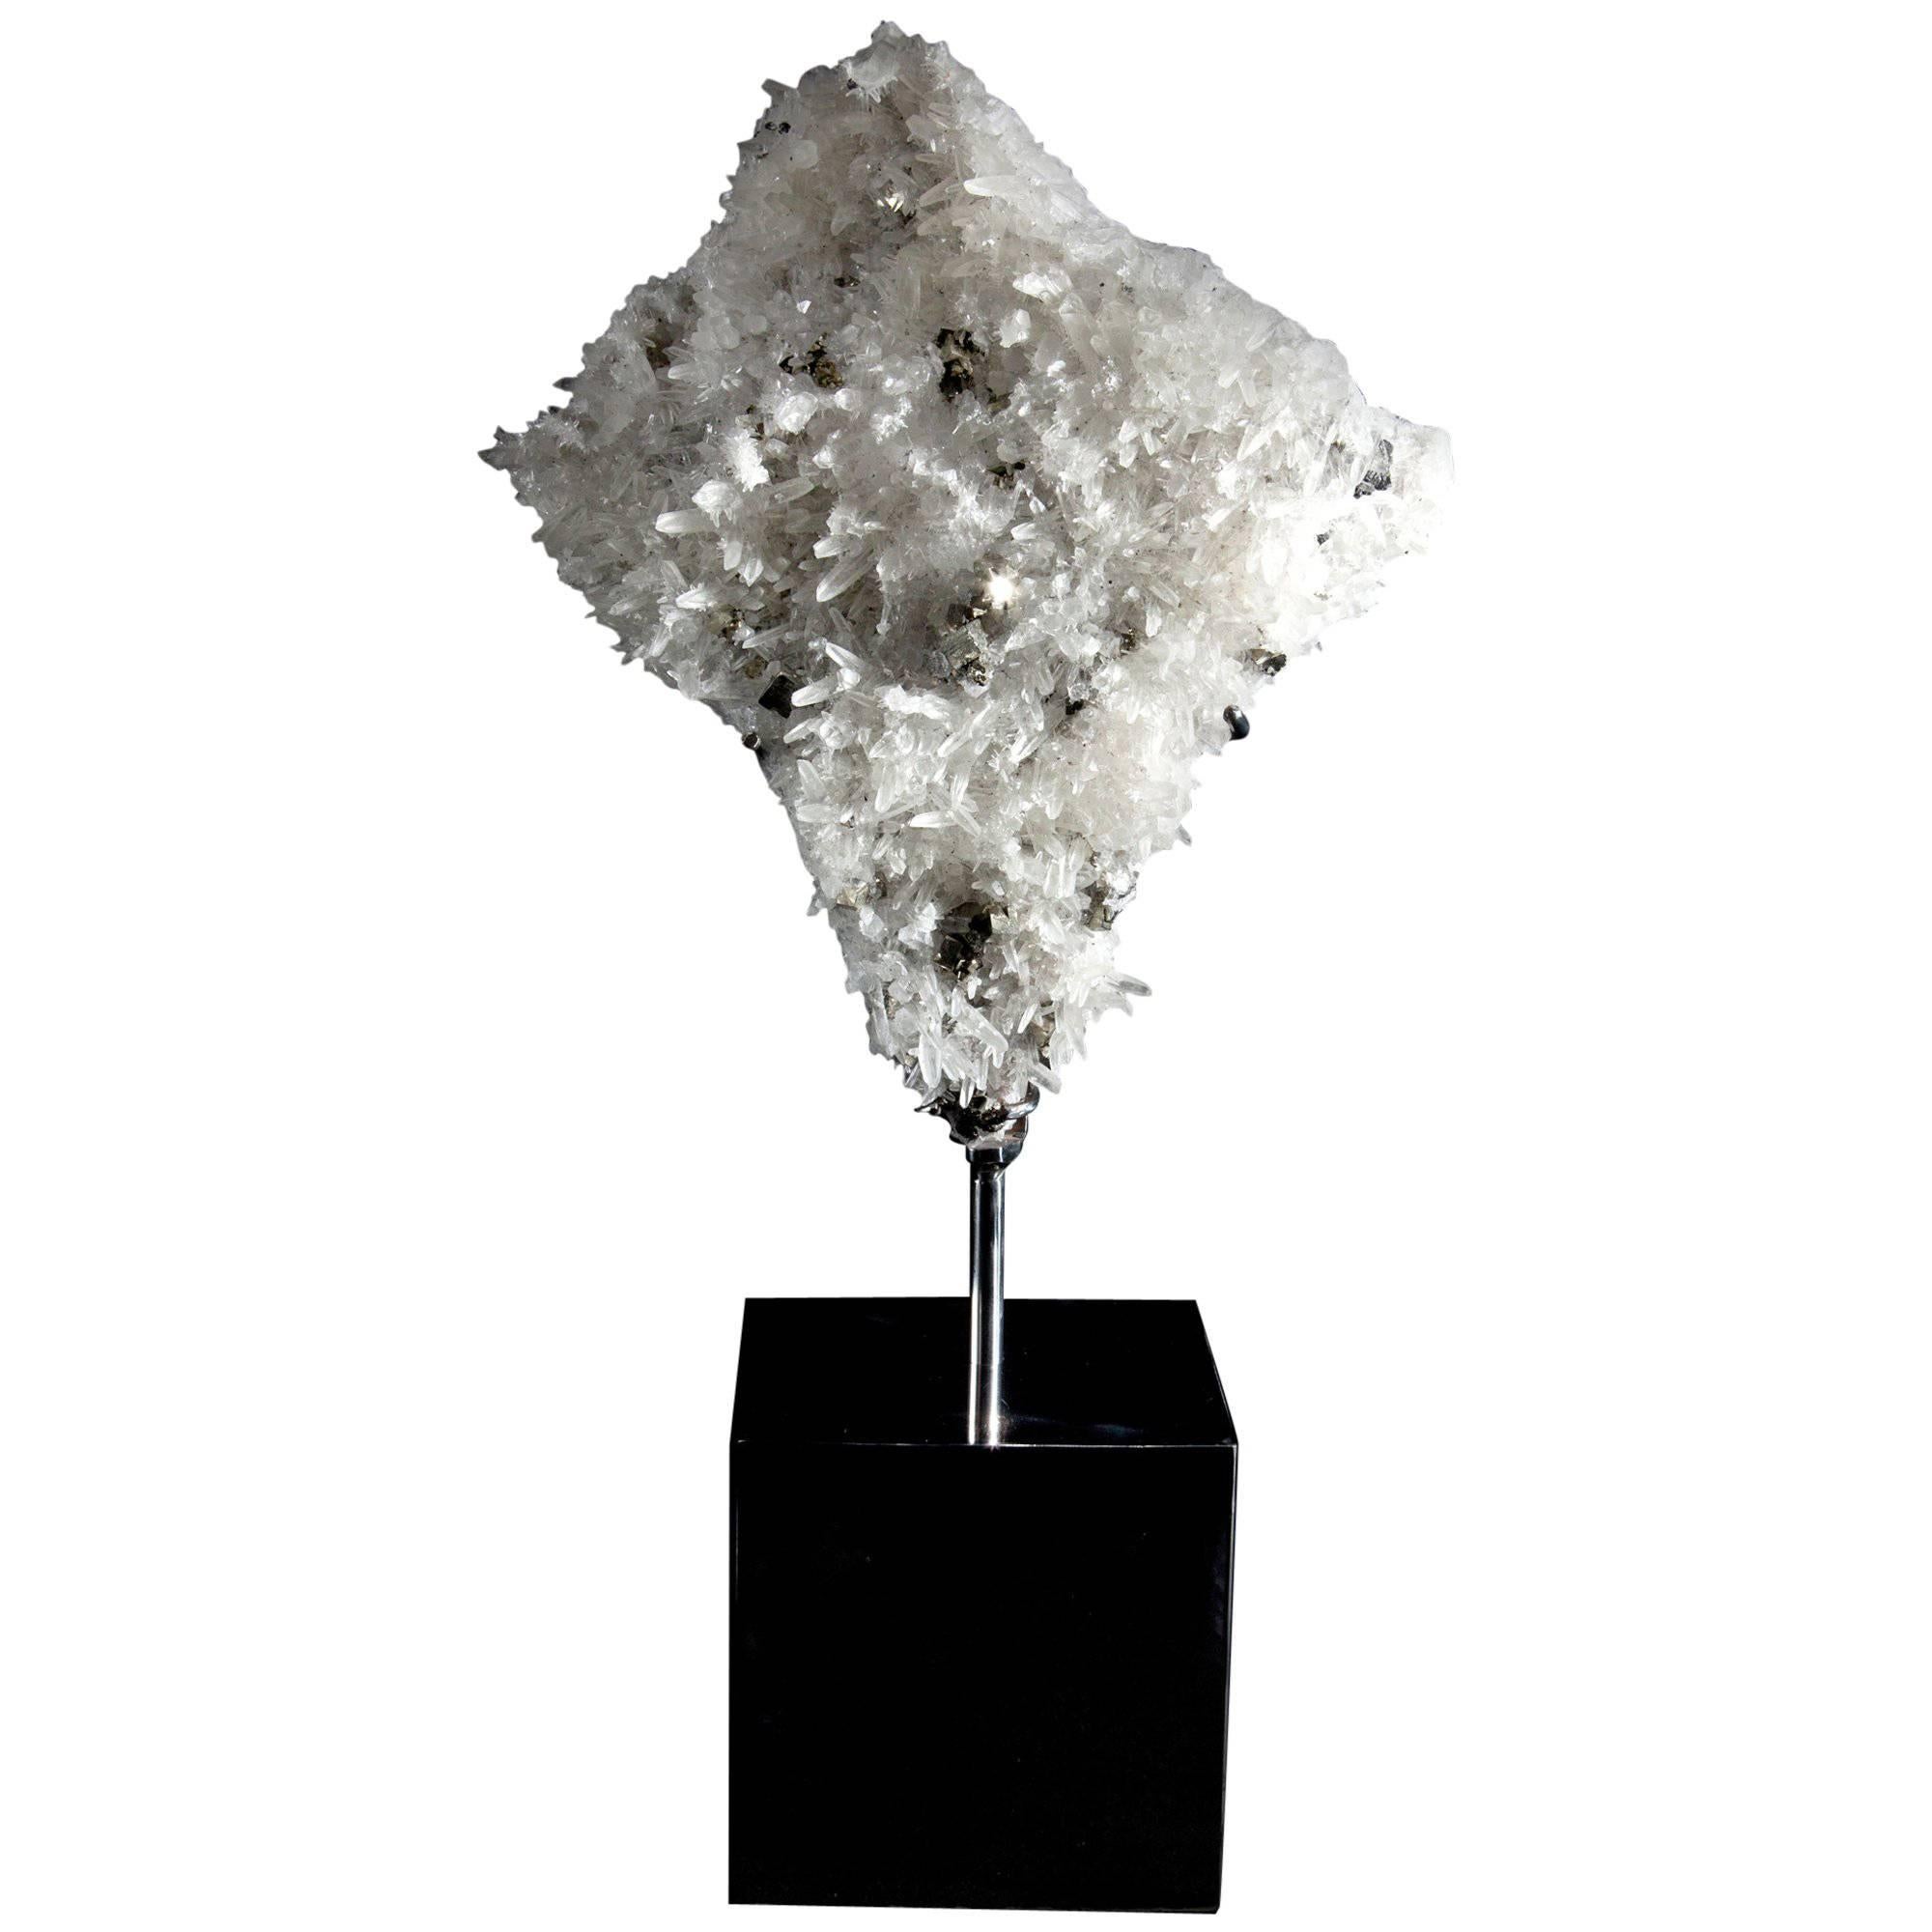 Mounted Quartz and Pyrite Formation